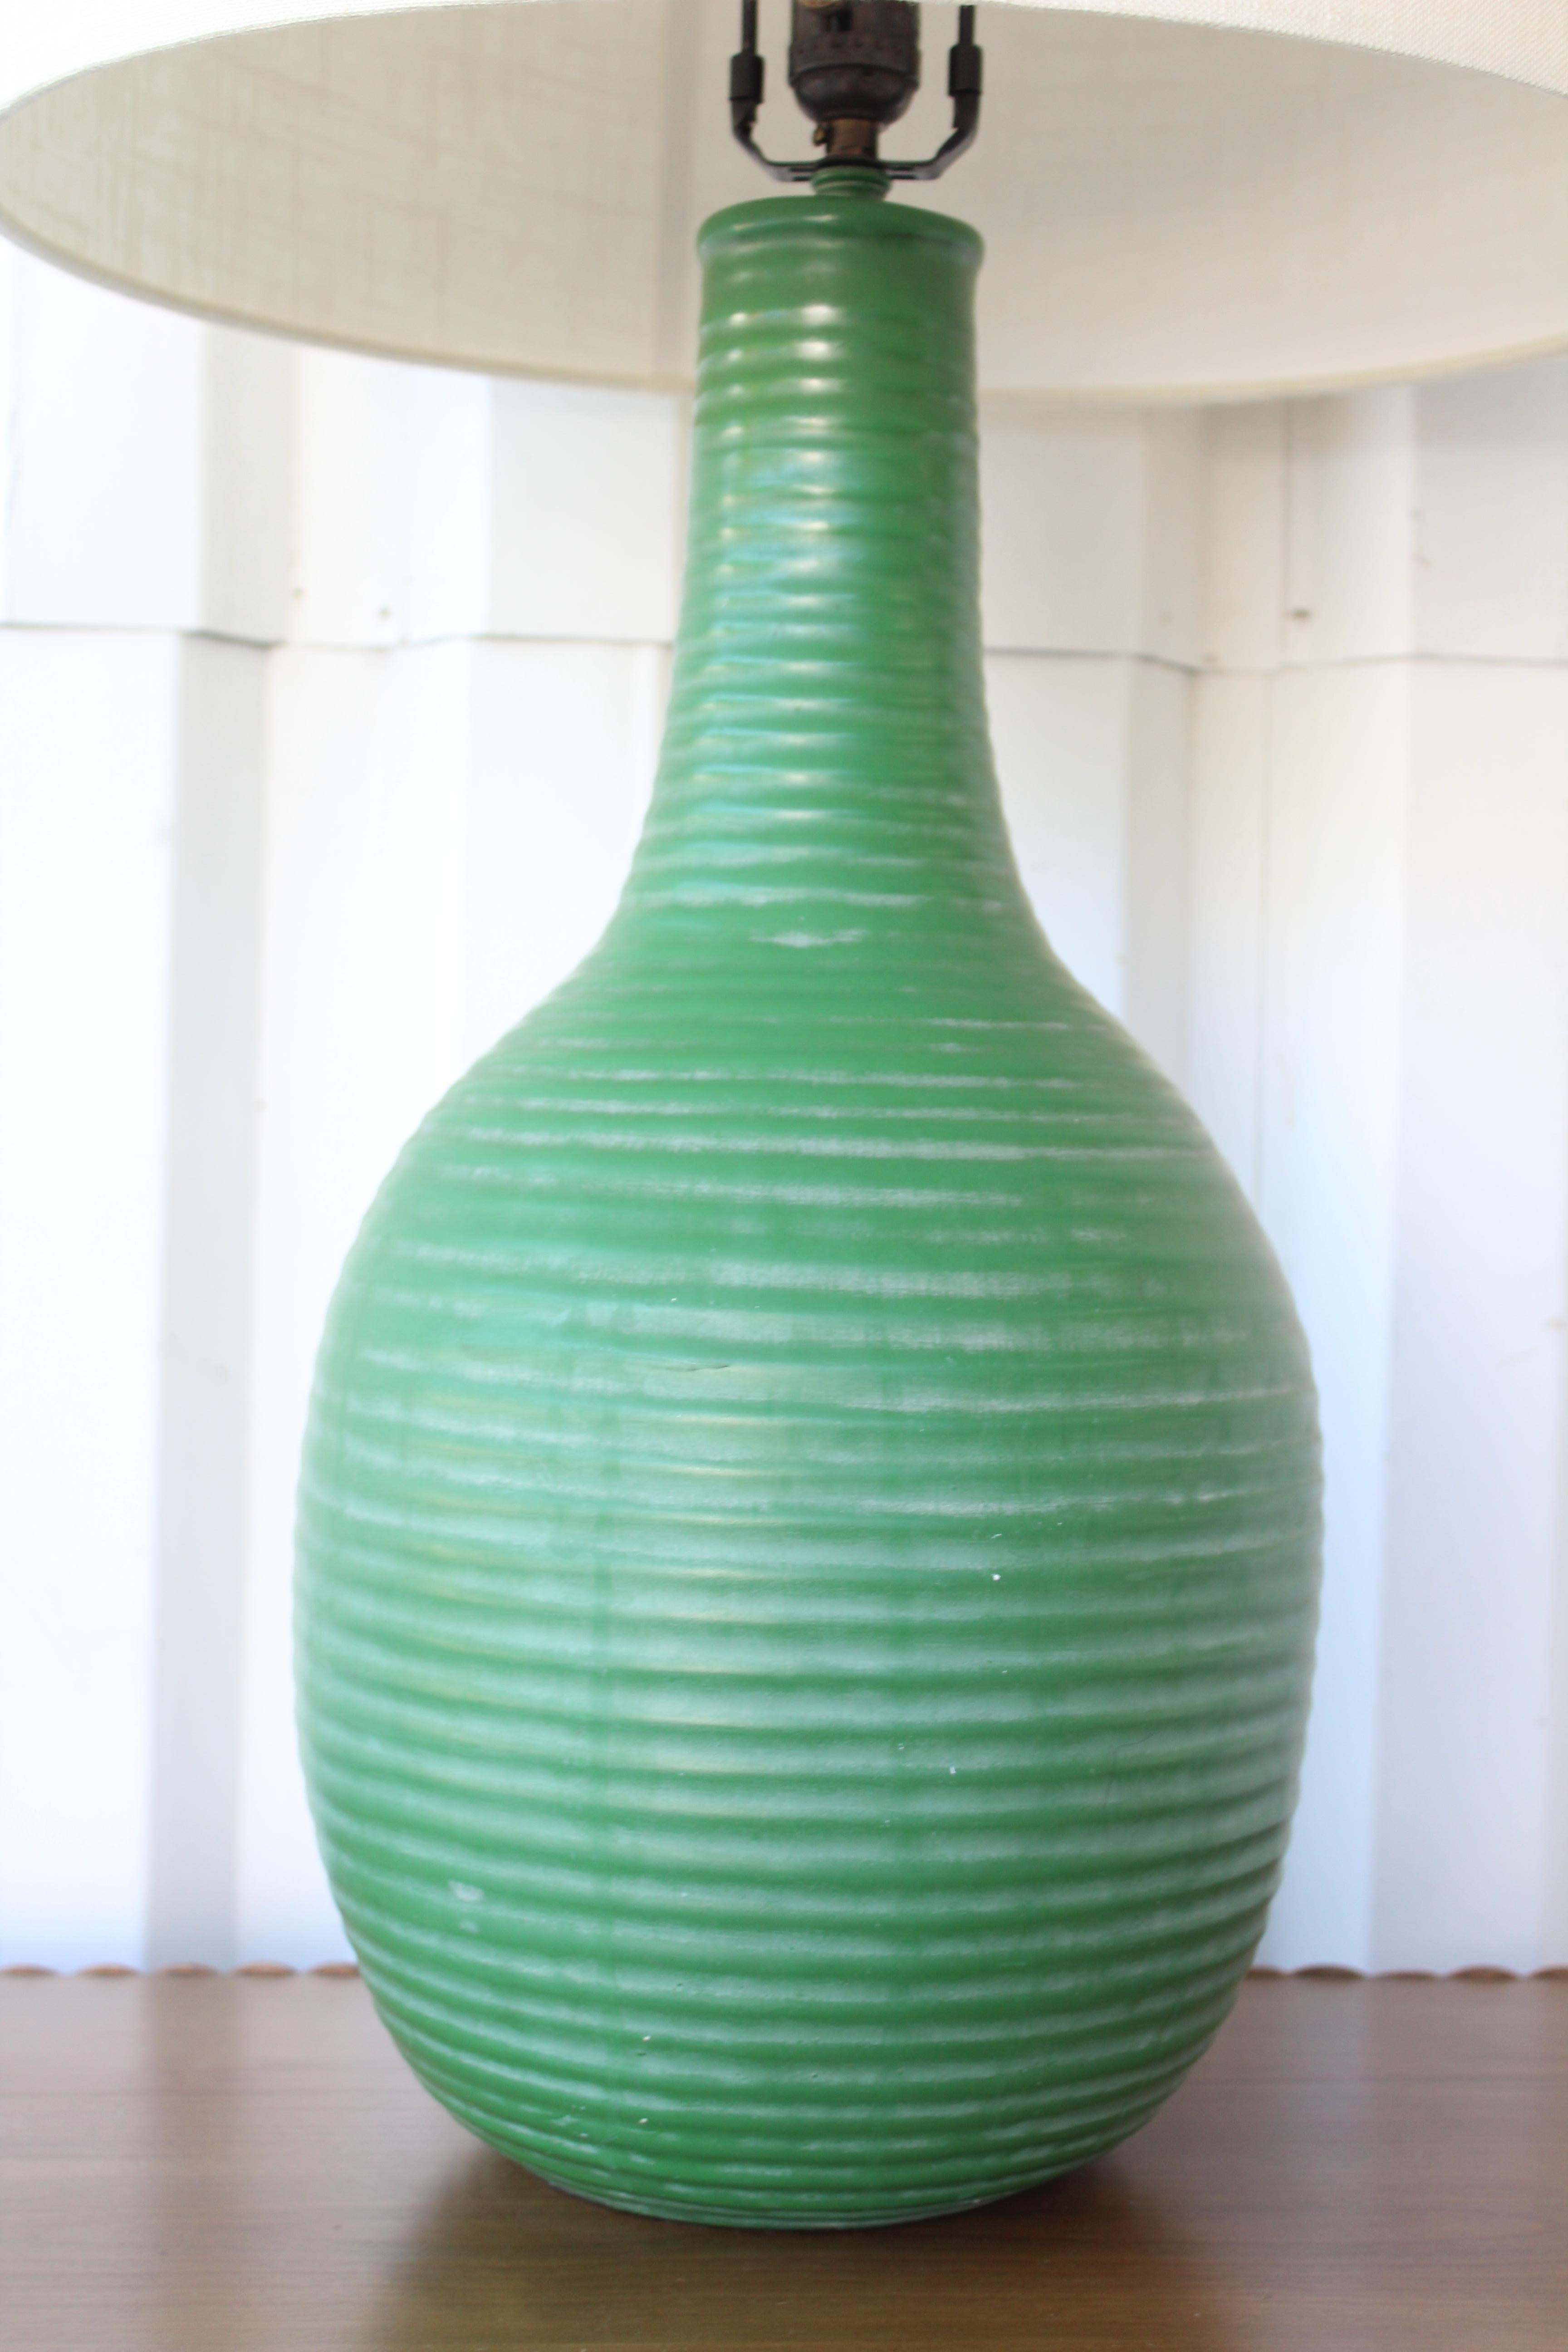 1950s ceramic lamp with ribbed texture and in a wonderful green glaze. Newly rewired and fitted with a custom shade in Belgian linen. Lamp shade is 18